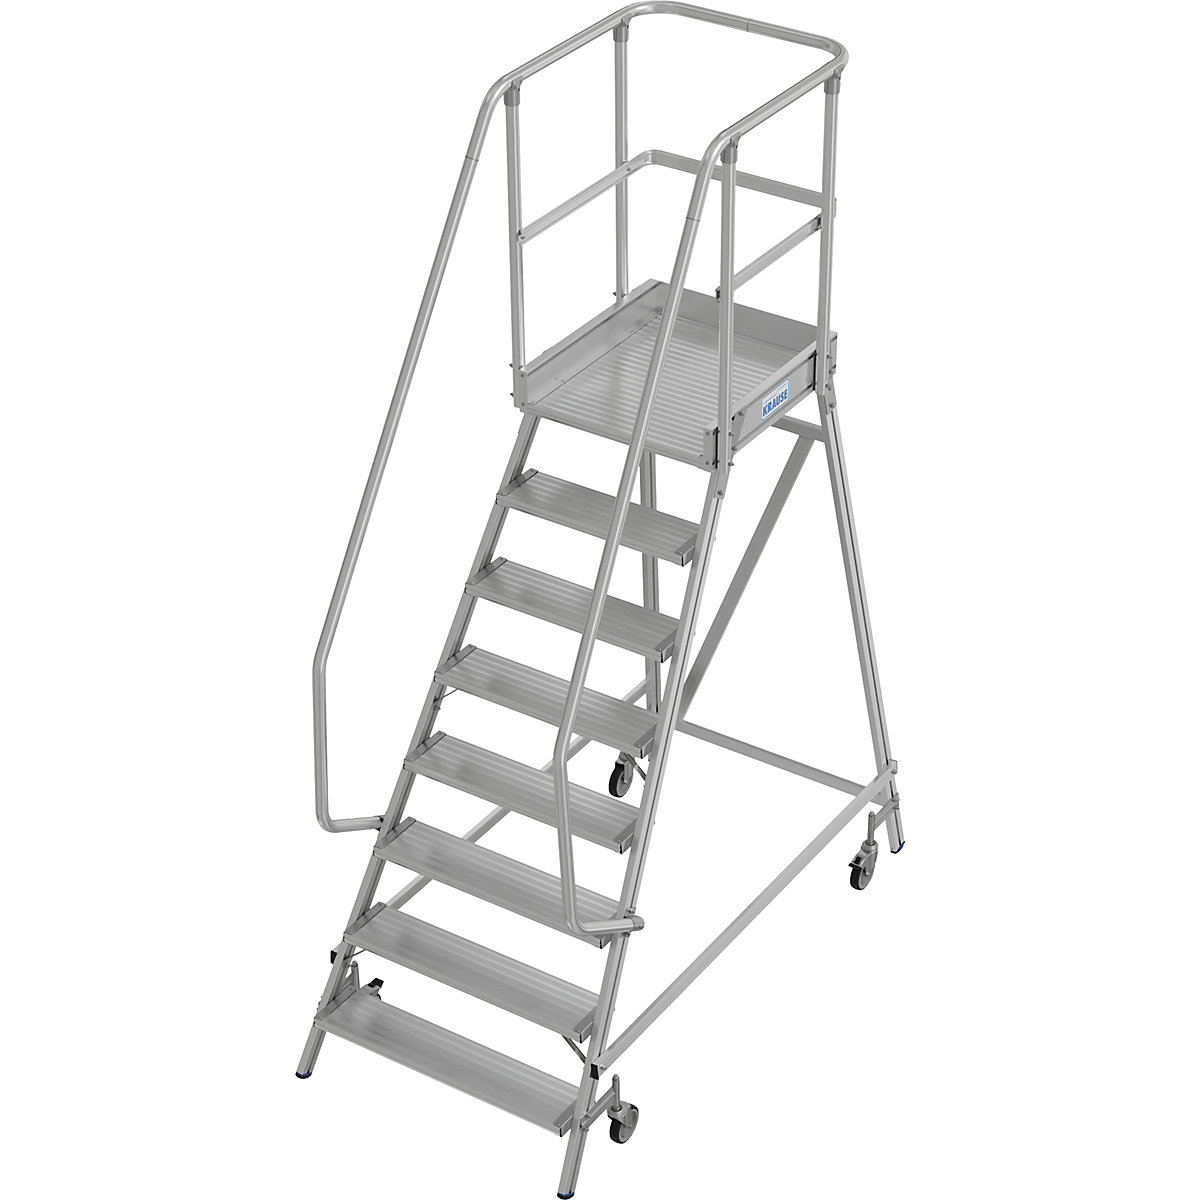 Mobile safety steps – KRAUSE, single sided access, 8 steps, 2+ items-10